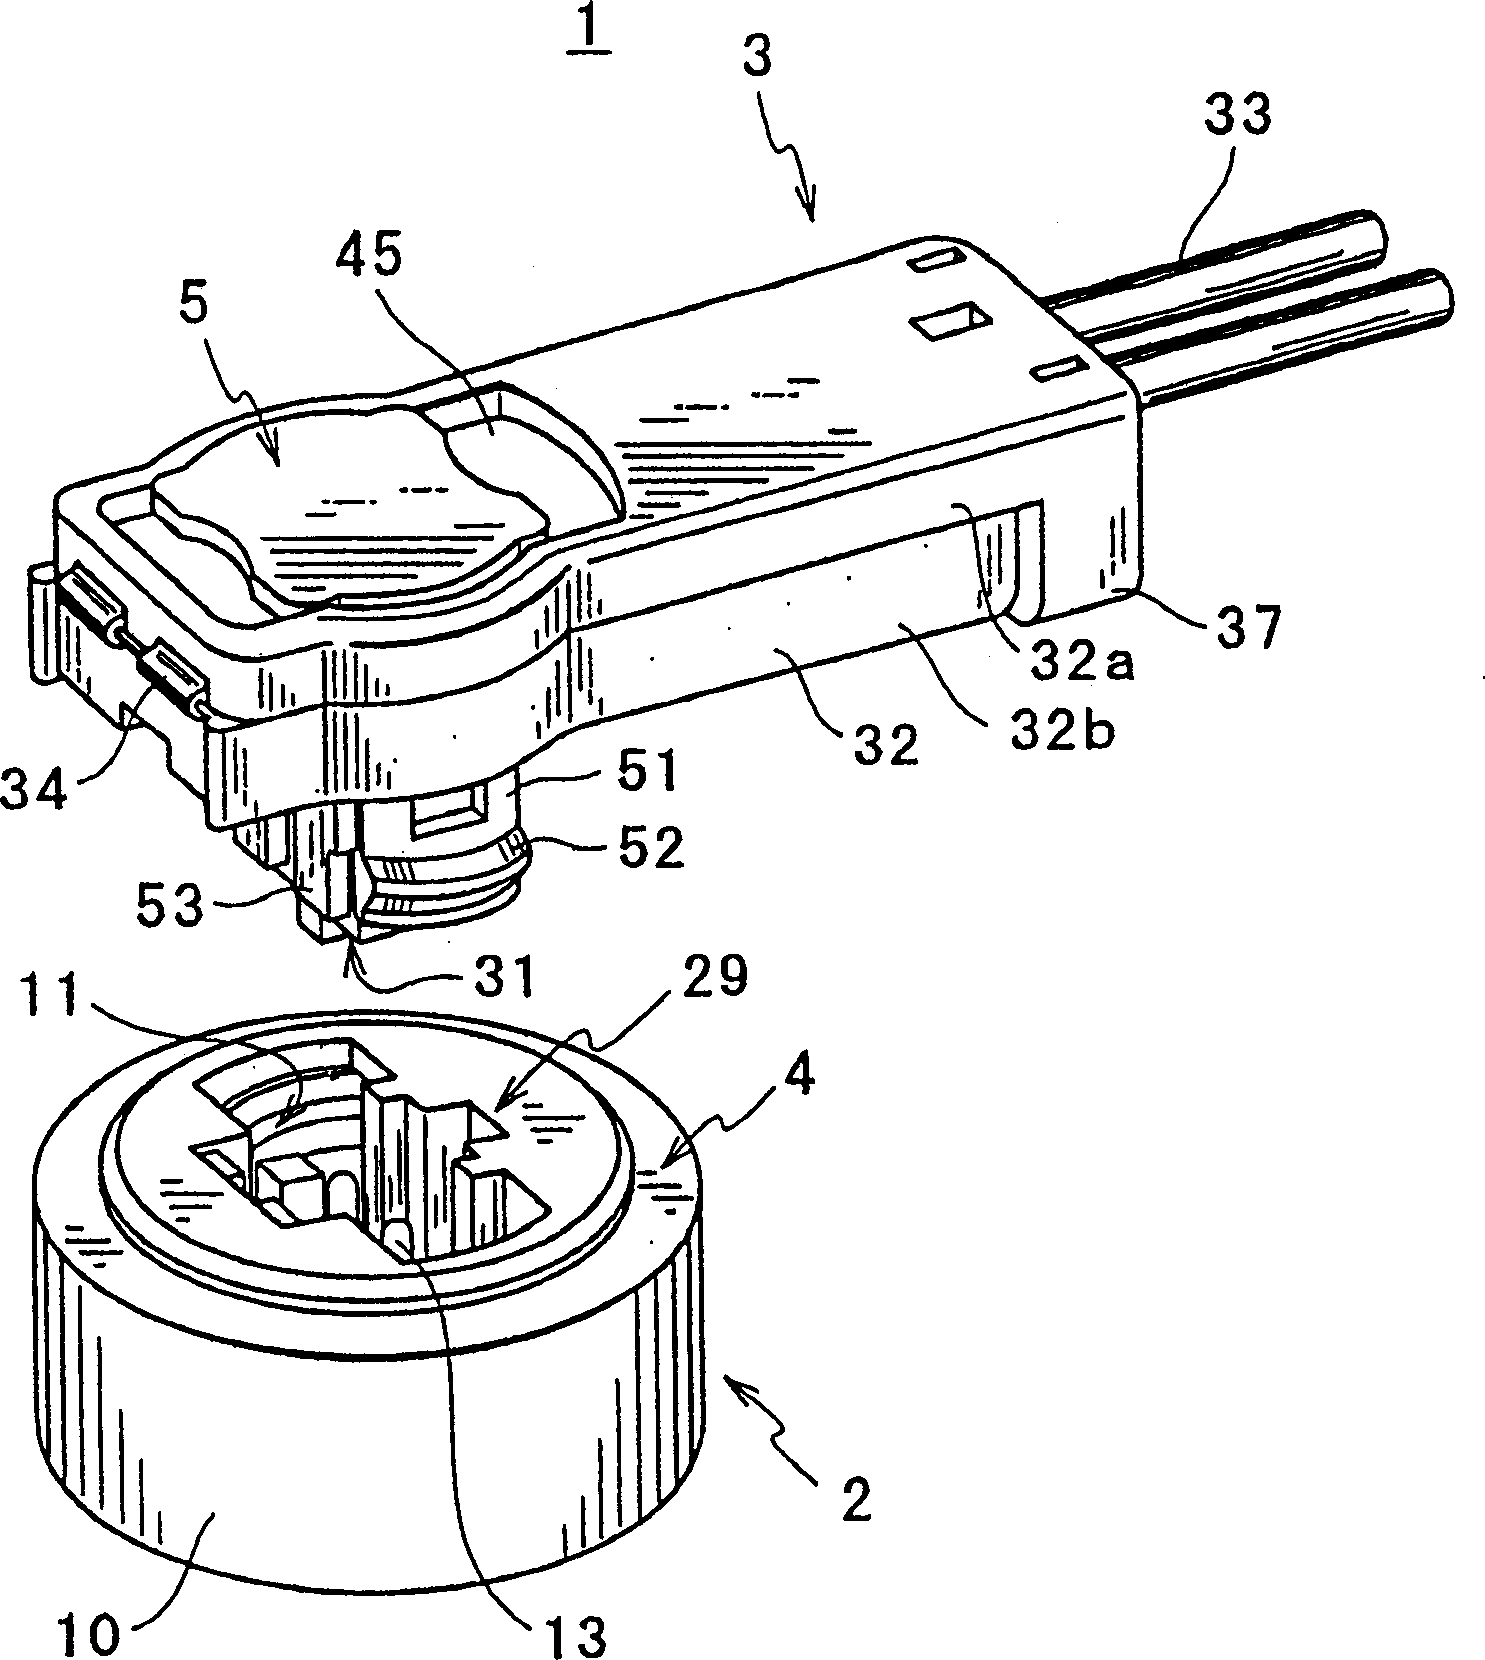 Electrical connector contg. locking parts